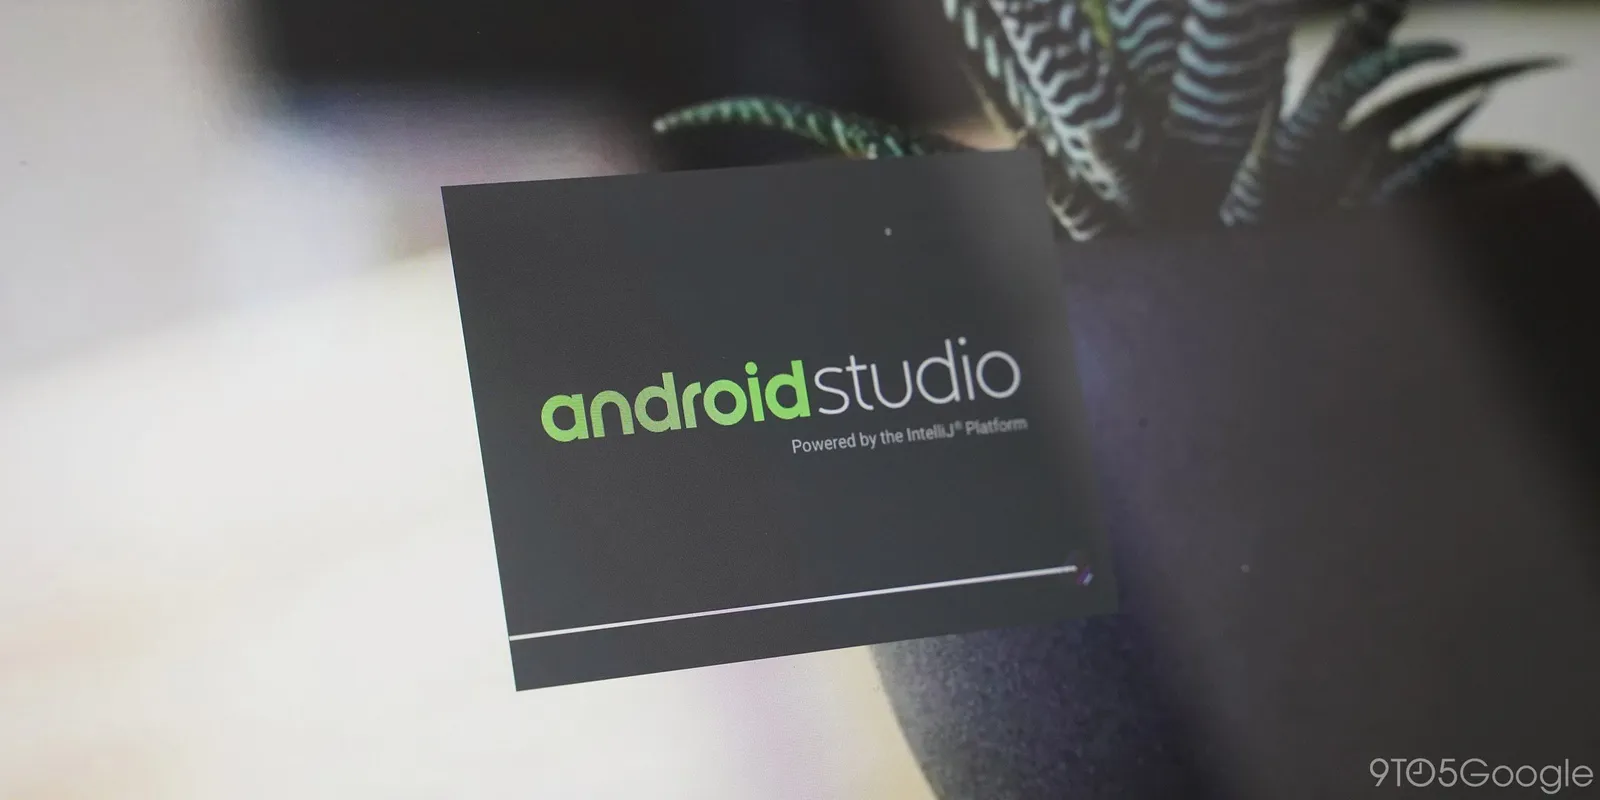 Android Studio 4.1 Includes New Database Inspector, Integrated Emulator.